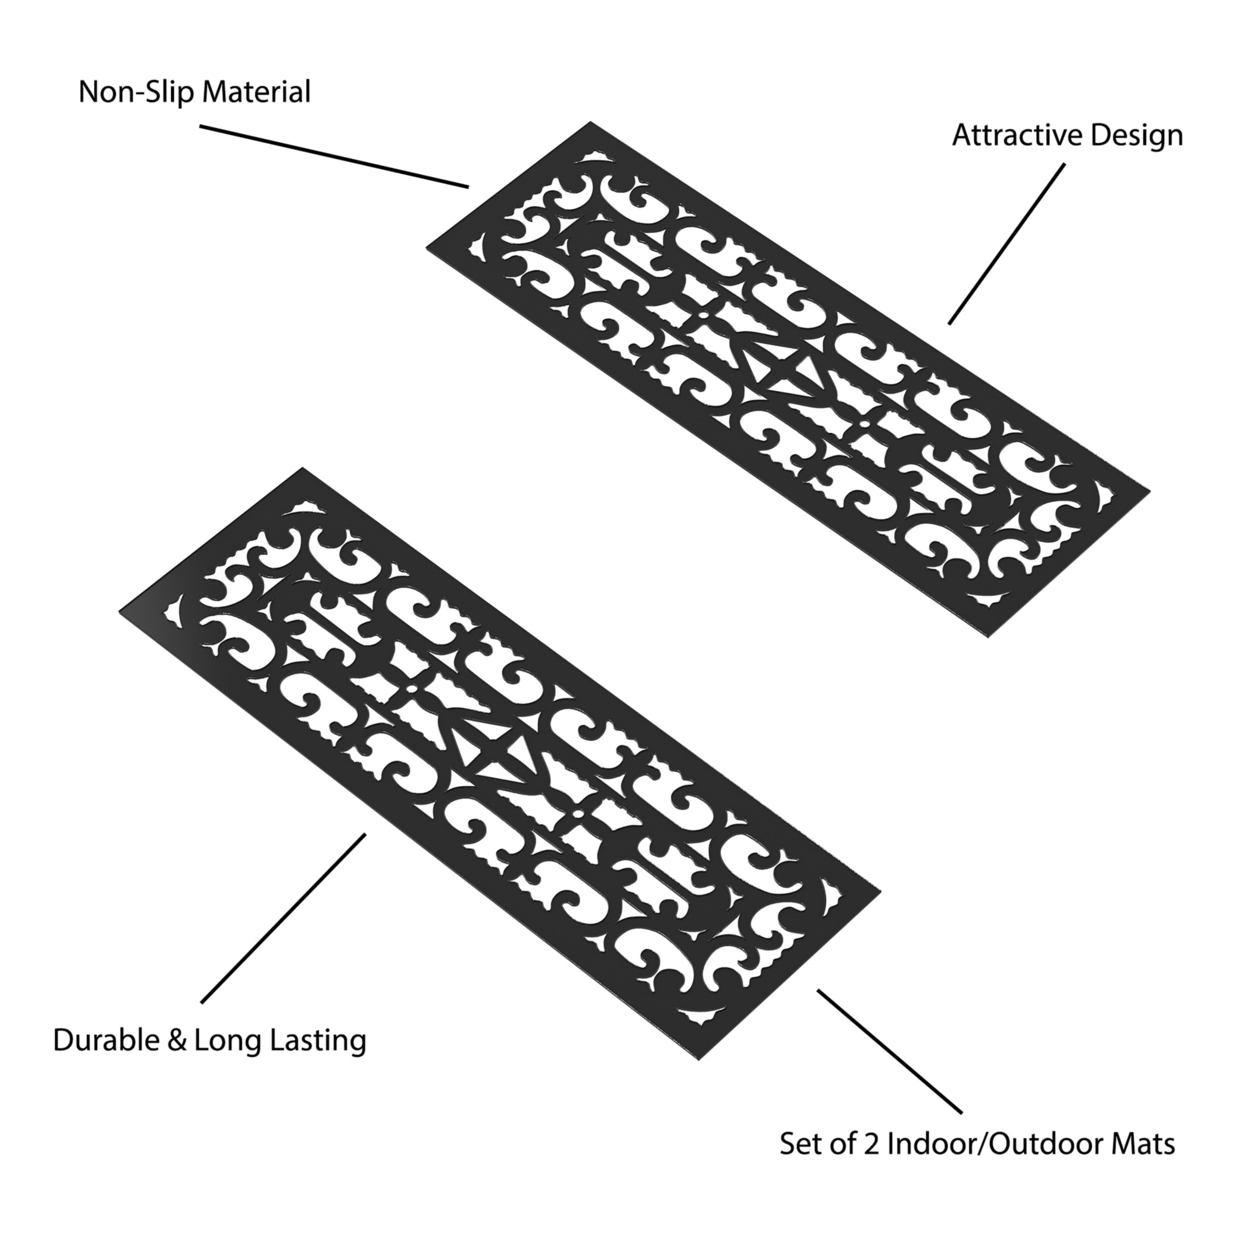 Non-Slip Stair Mats With Traction Control Grip- Heavy Duty Rubber Tread, Ornate Design For Indoor/Outdoor Use, Set Of 2 Black Mat Pads